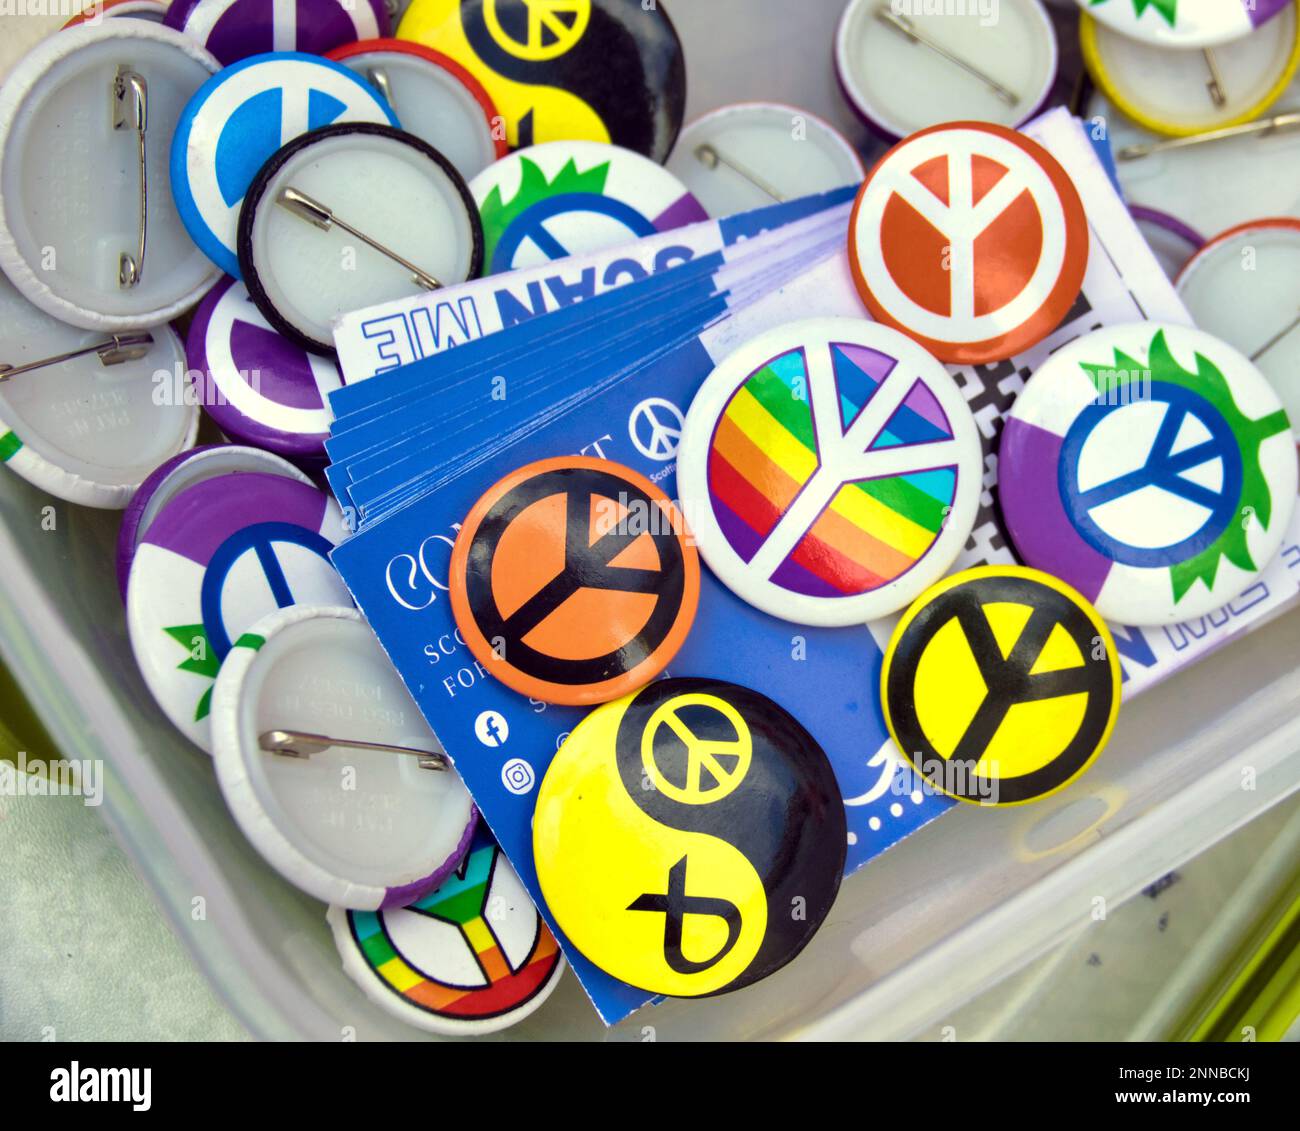 Glasgow, Scotland, UK 25th February, 2023. Glasgow CND on sauchiehall street handing out leaflets and badges for a nuclear free scotland.  Credit Gerard Ferry/Alamy Live News Stock Photo